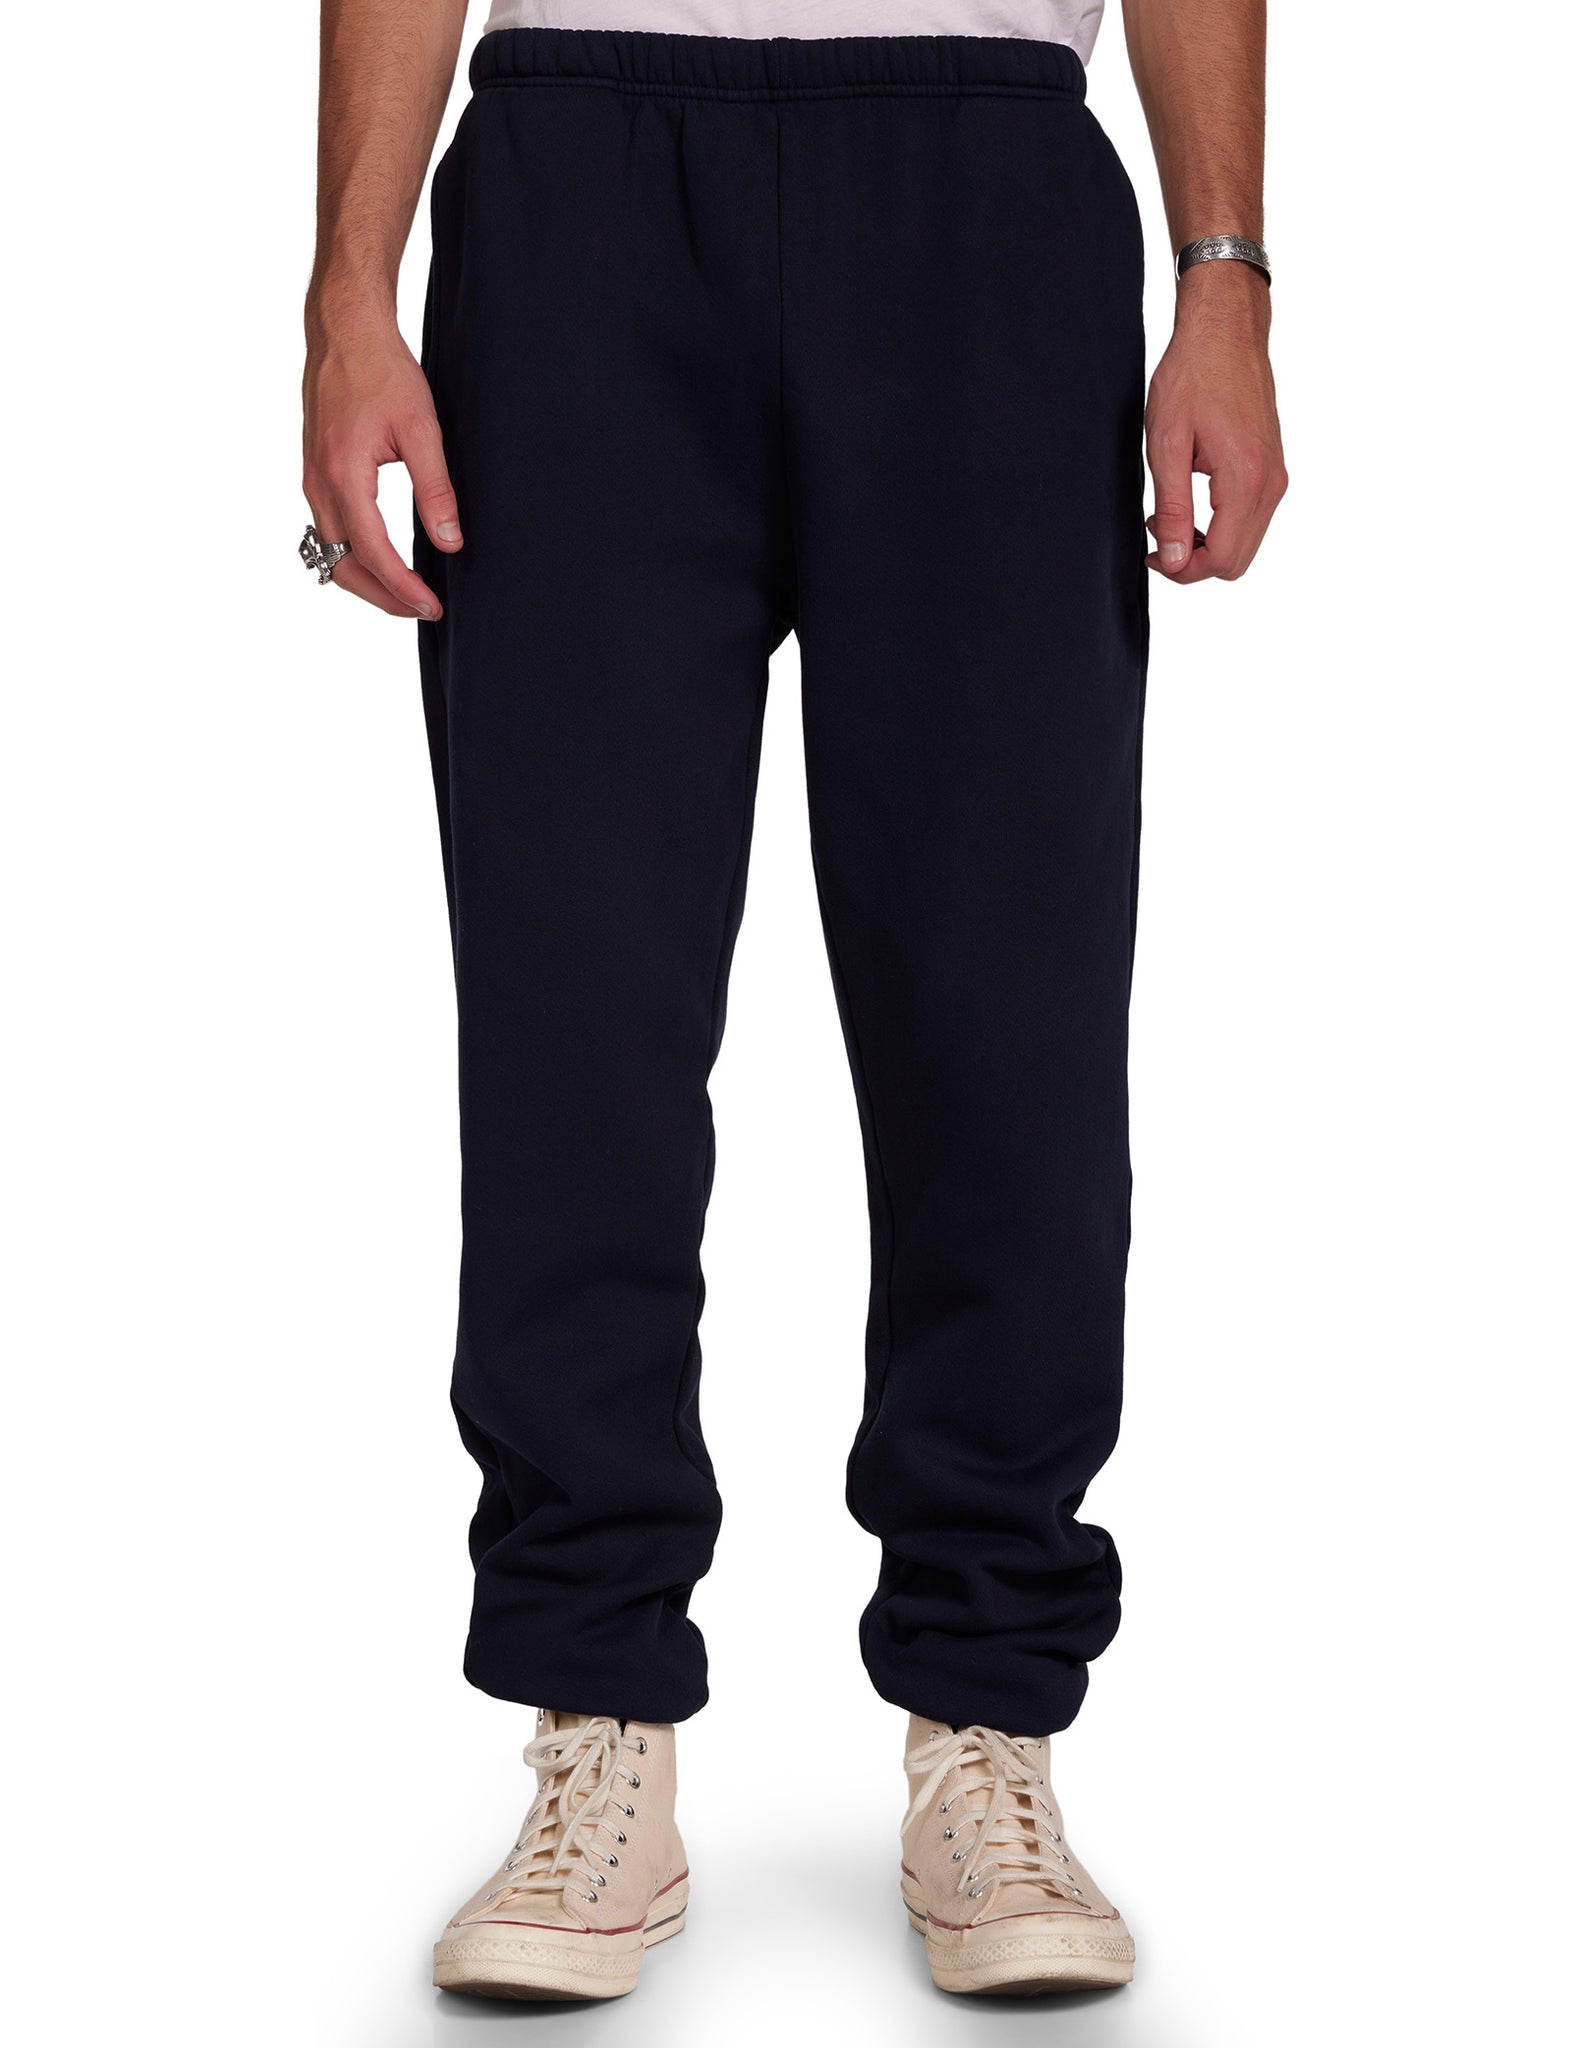 Les Tien, Eazy Cotton-jersey Track Pants, Black, x  small,small,medium,large,x large